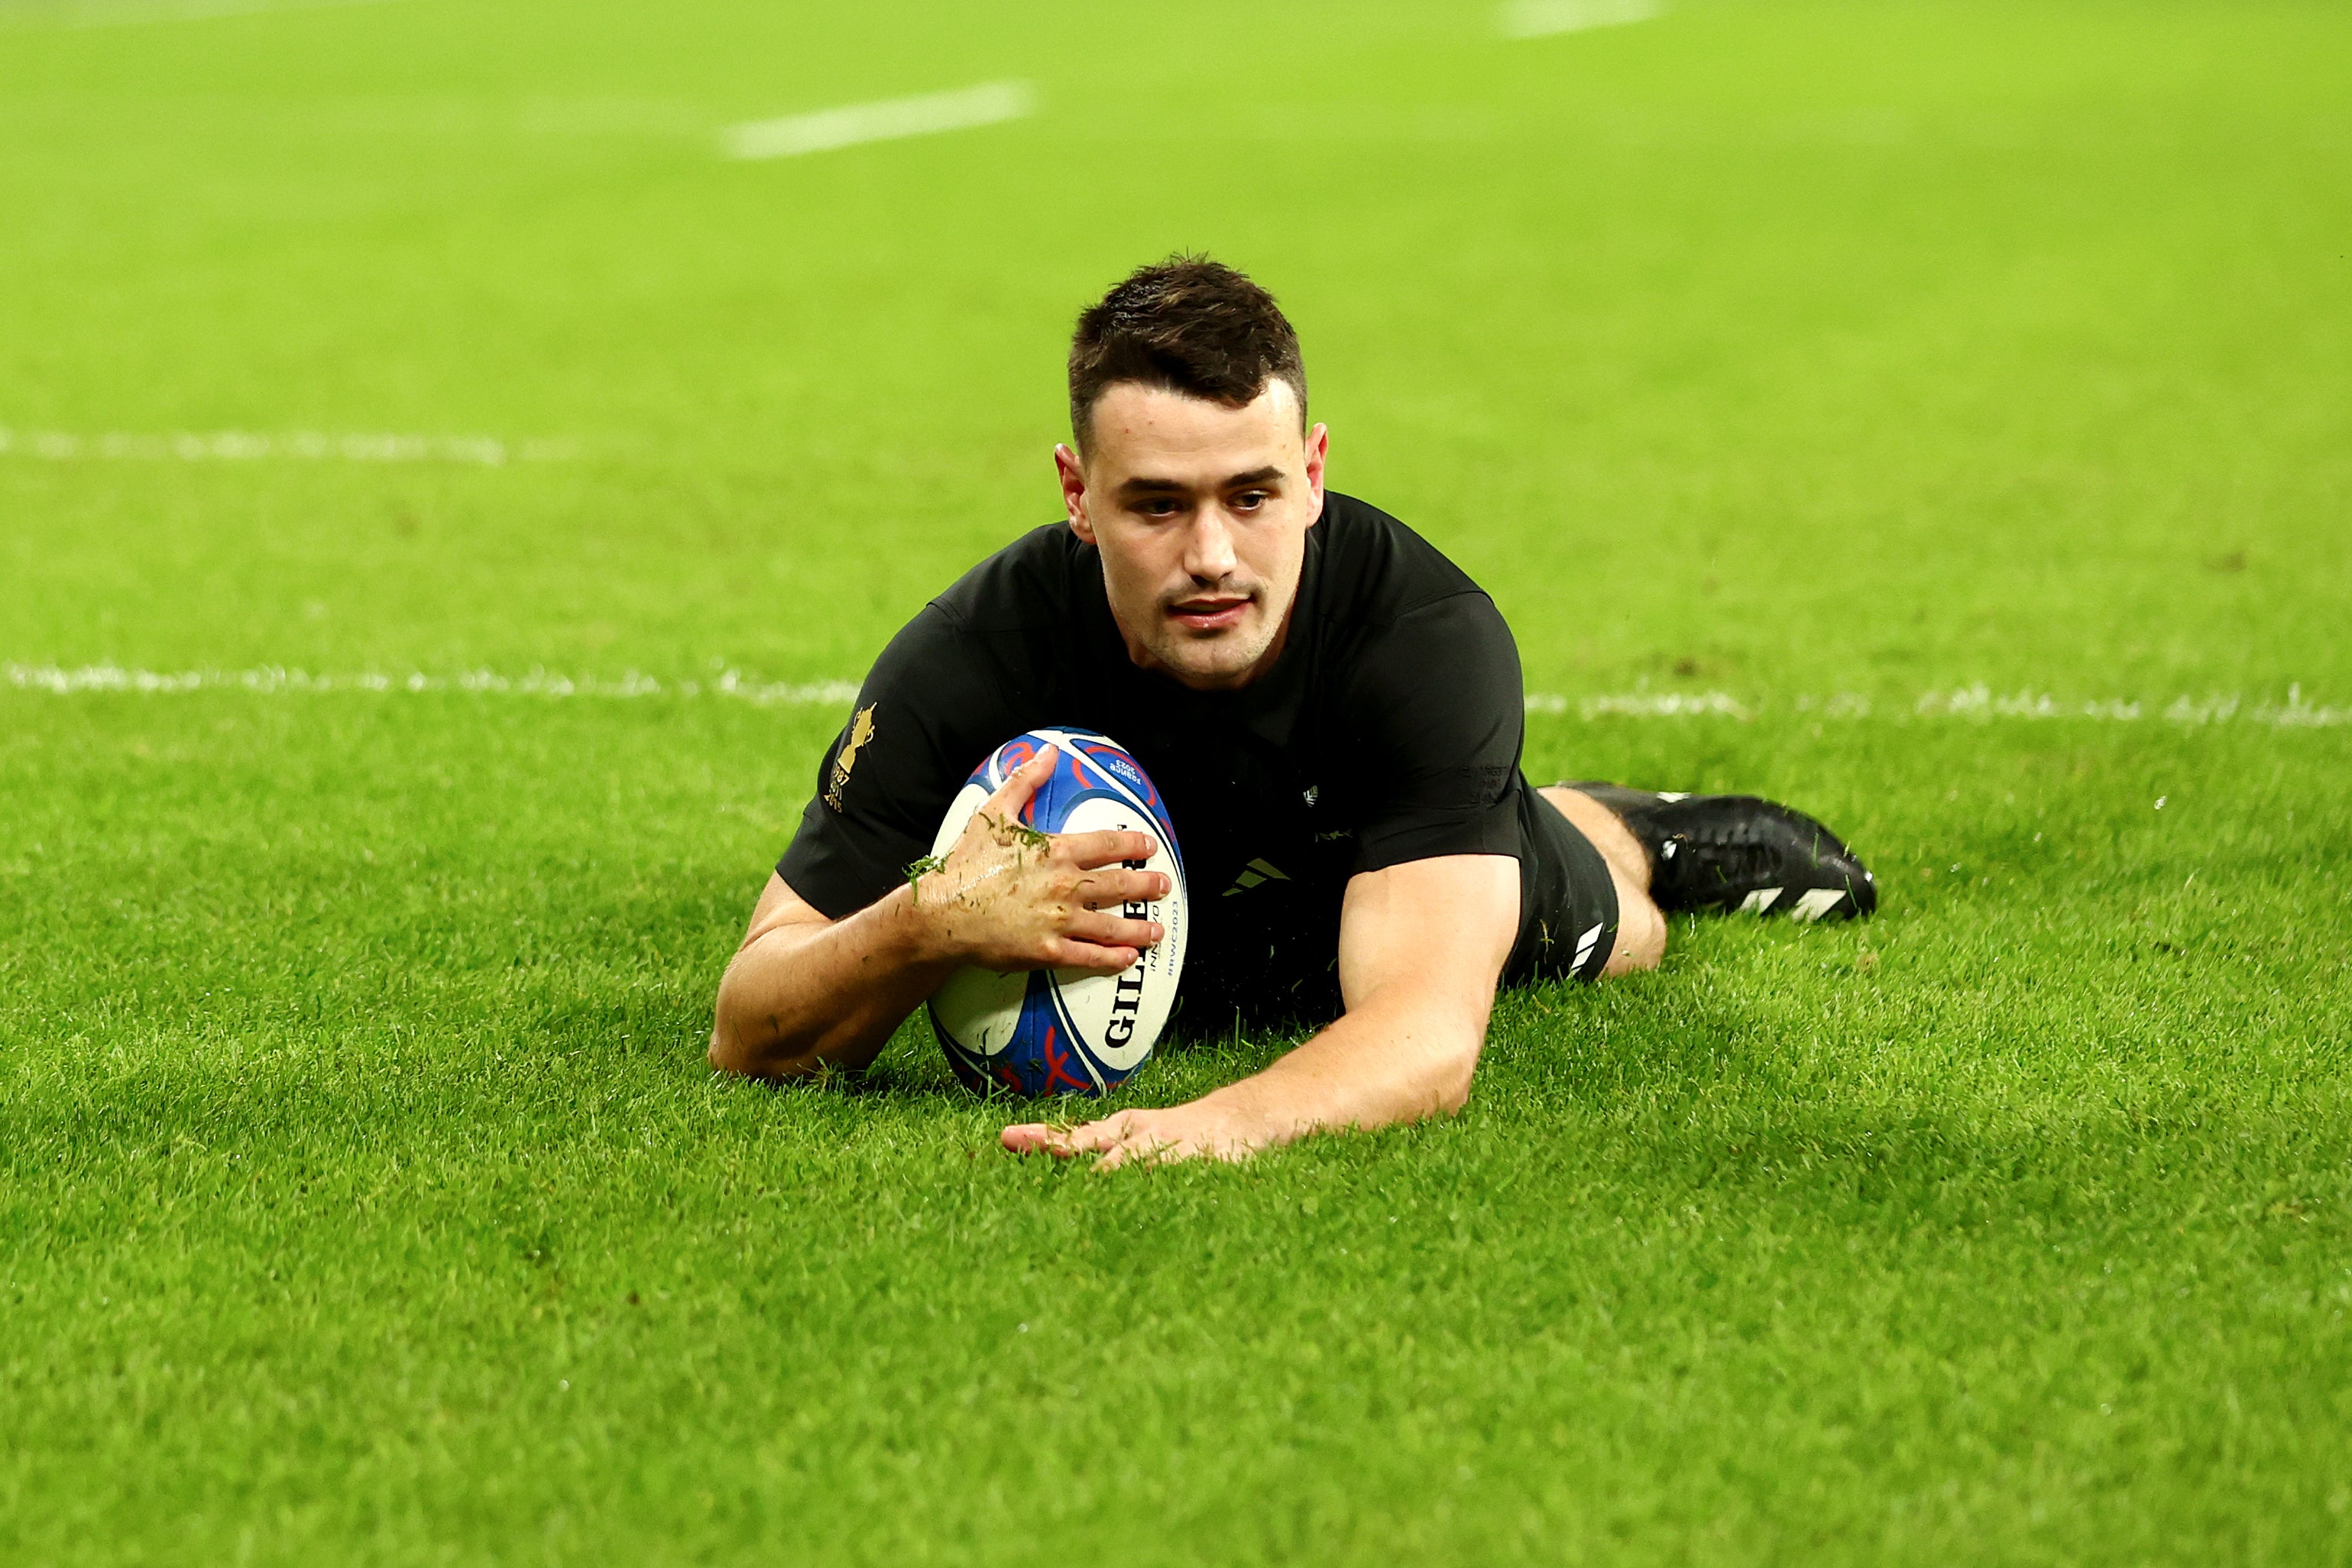 New Zealand wing Will Jordan has enjoyed a sensational Rugby World Cup